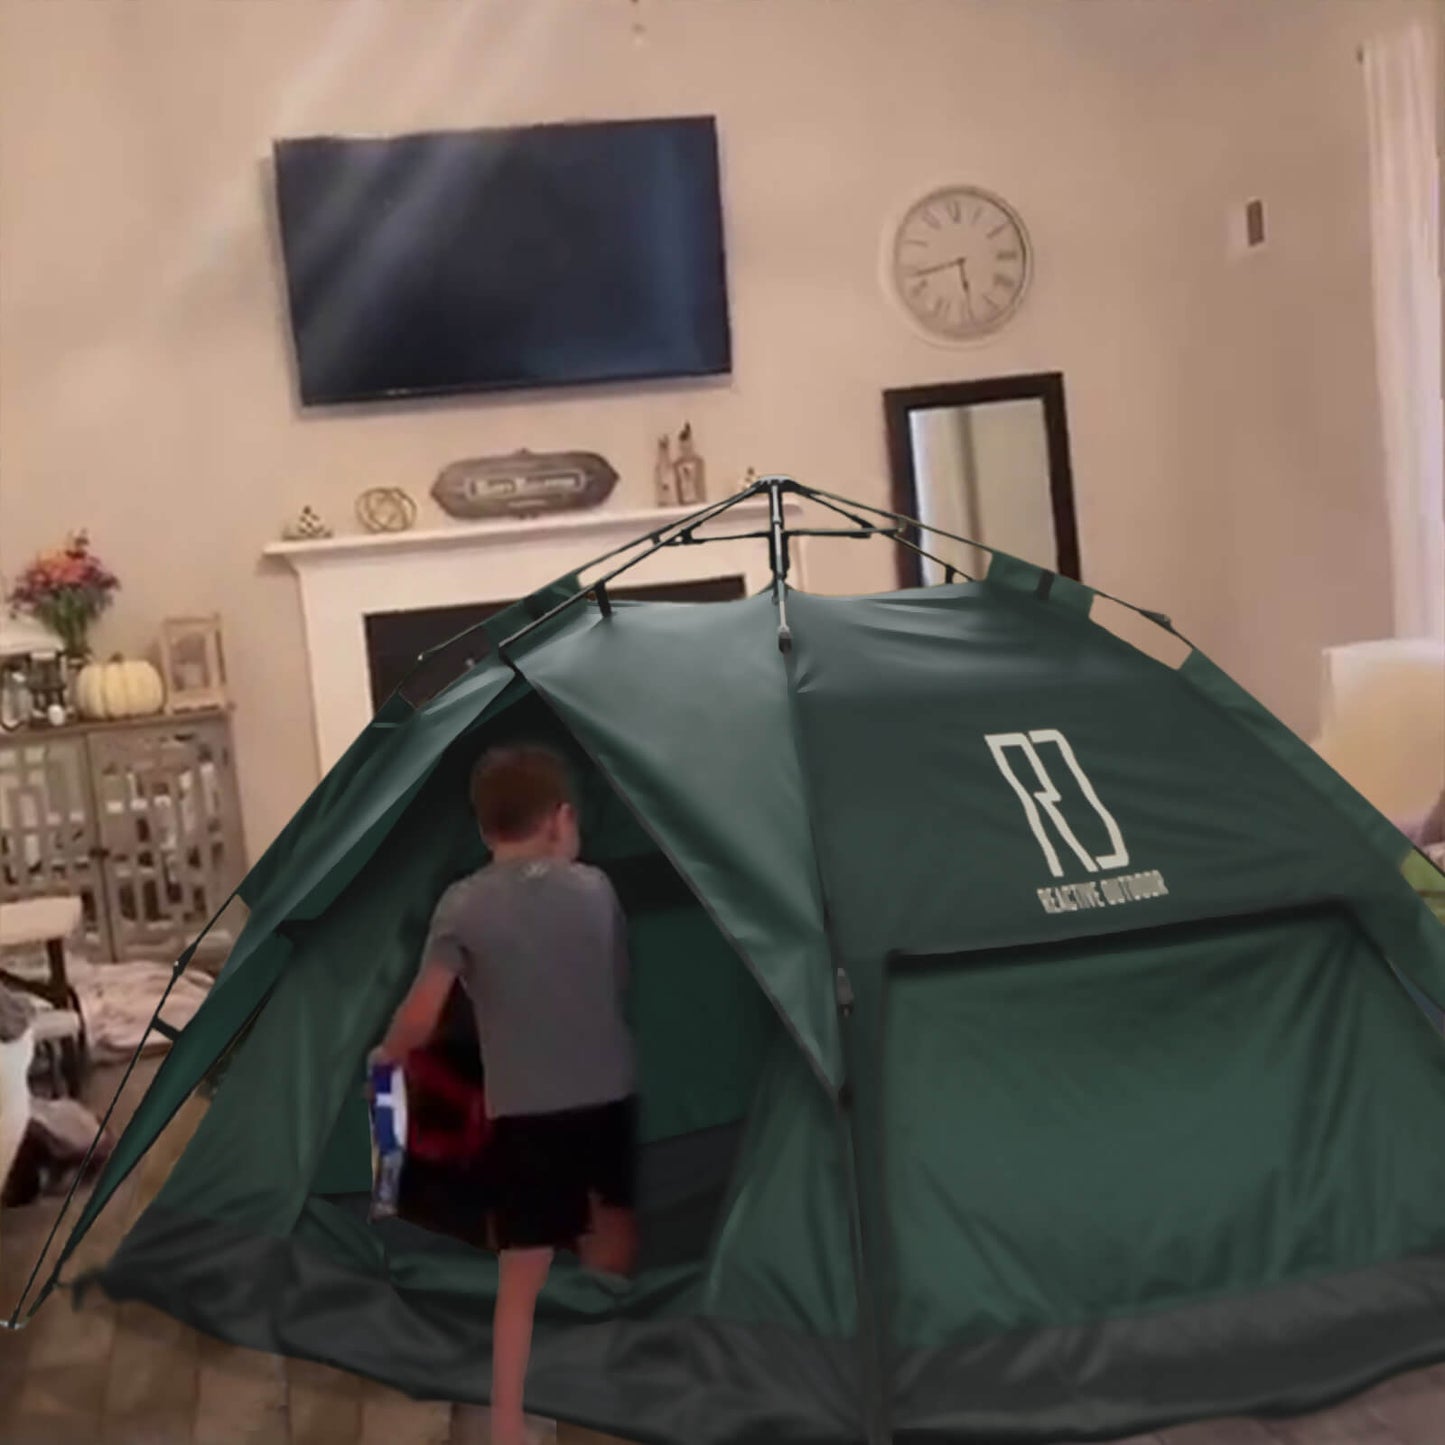 1 Small-Sized + 1 Large-Sized 3Secs Tent (Family Package, EU) + Free Camping Checklist